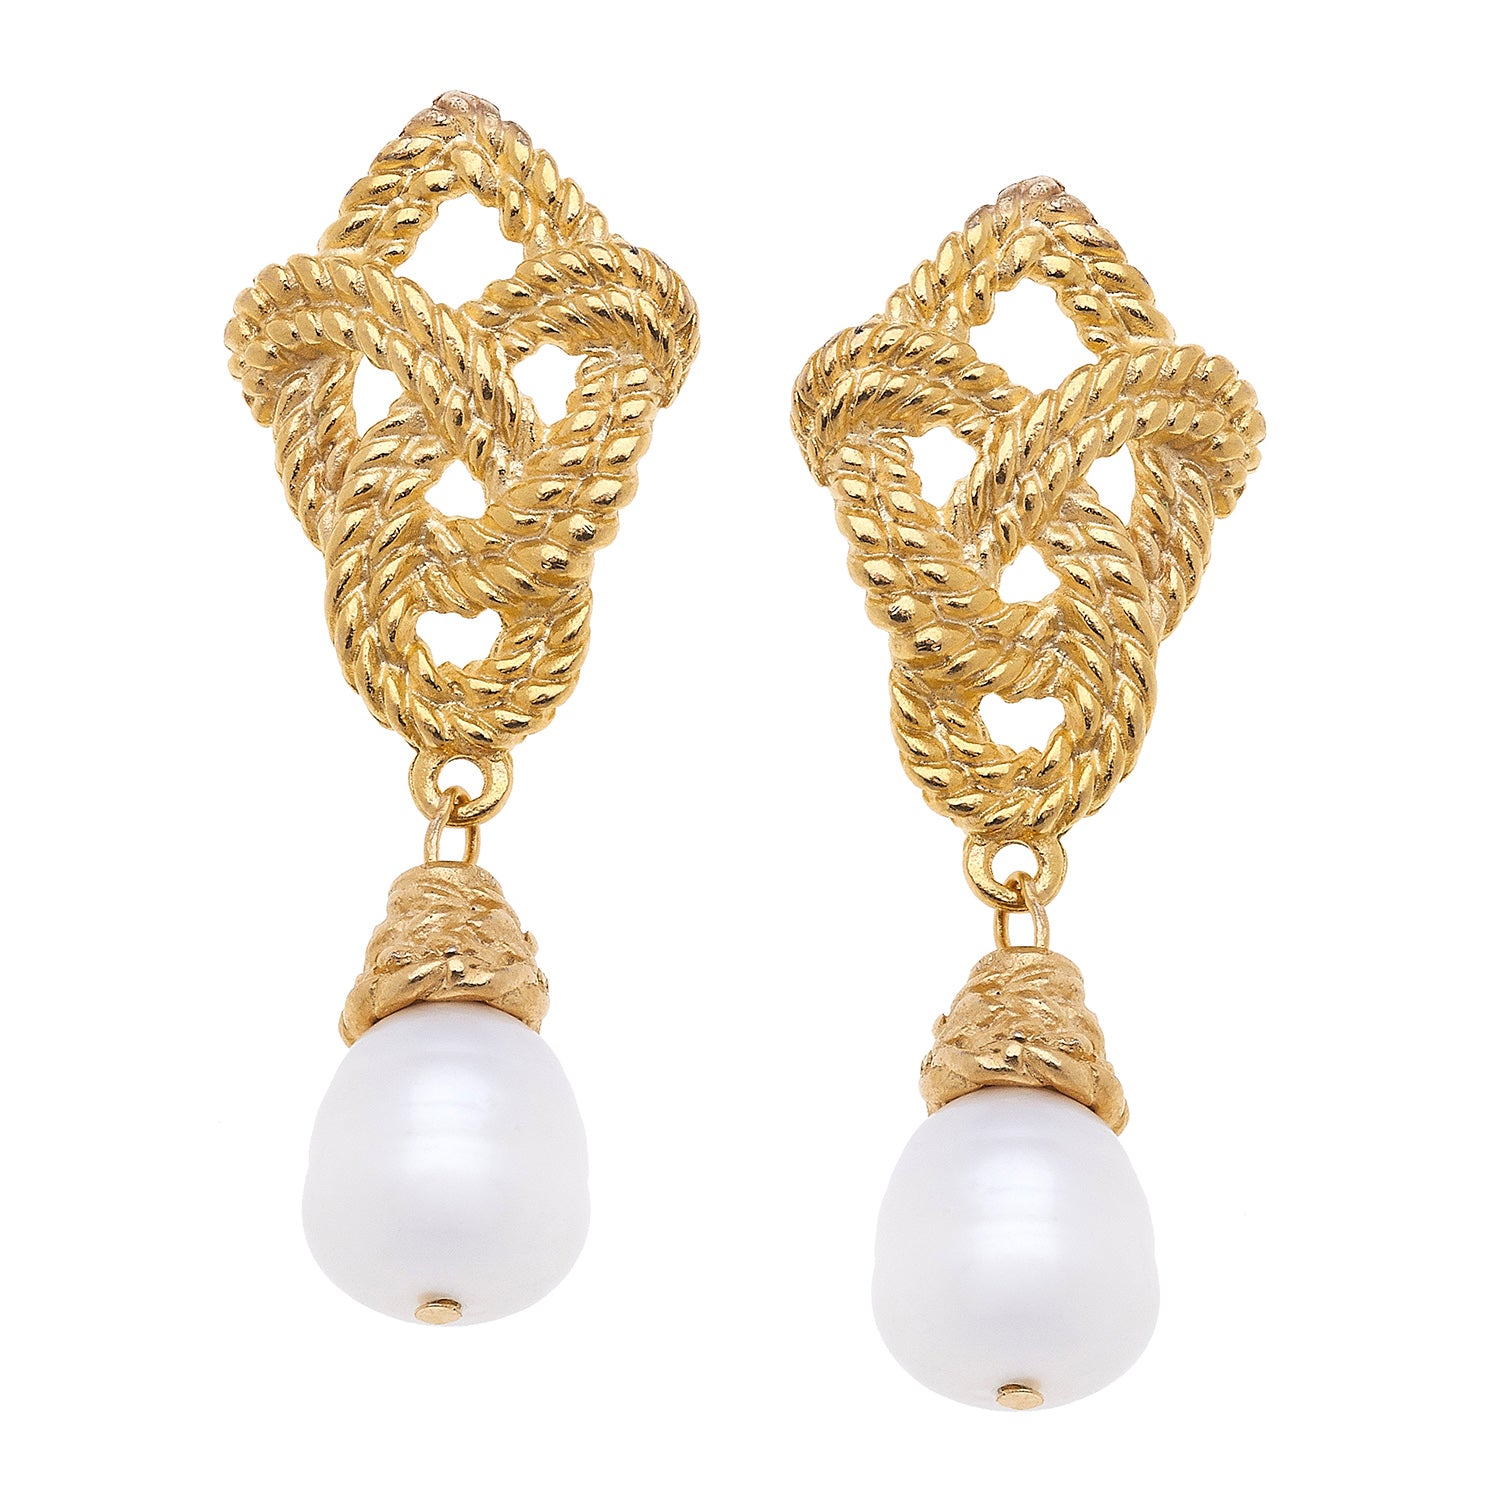 Susan Shaw 1135 Laced Rope and Pearl Earrings